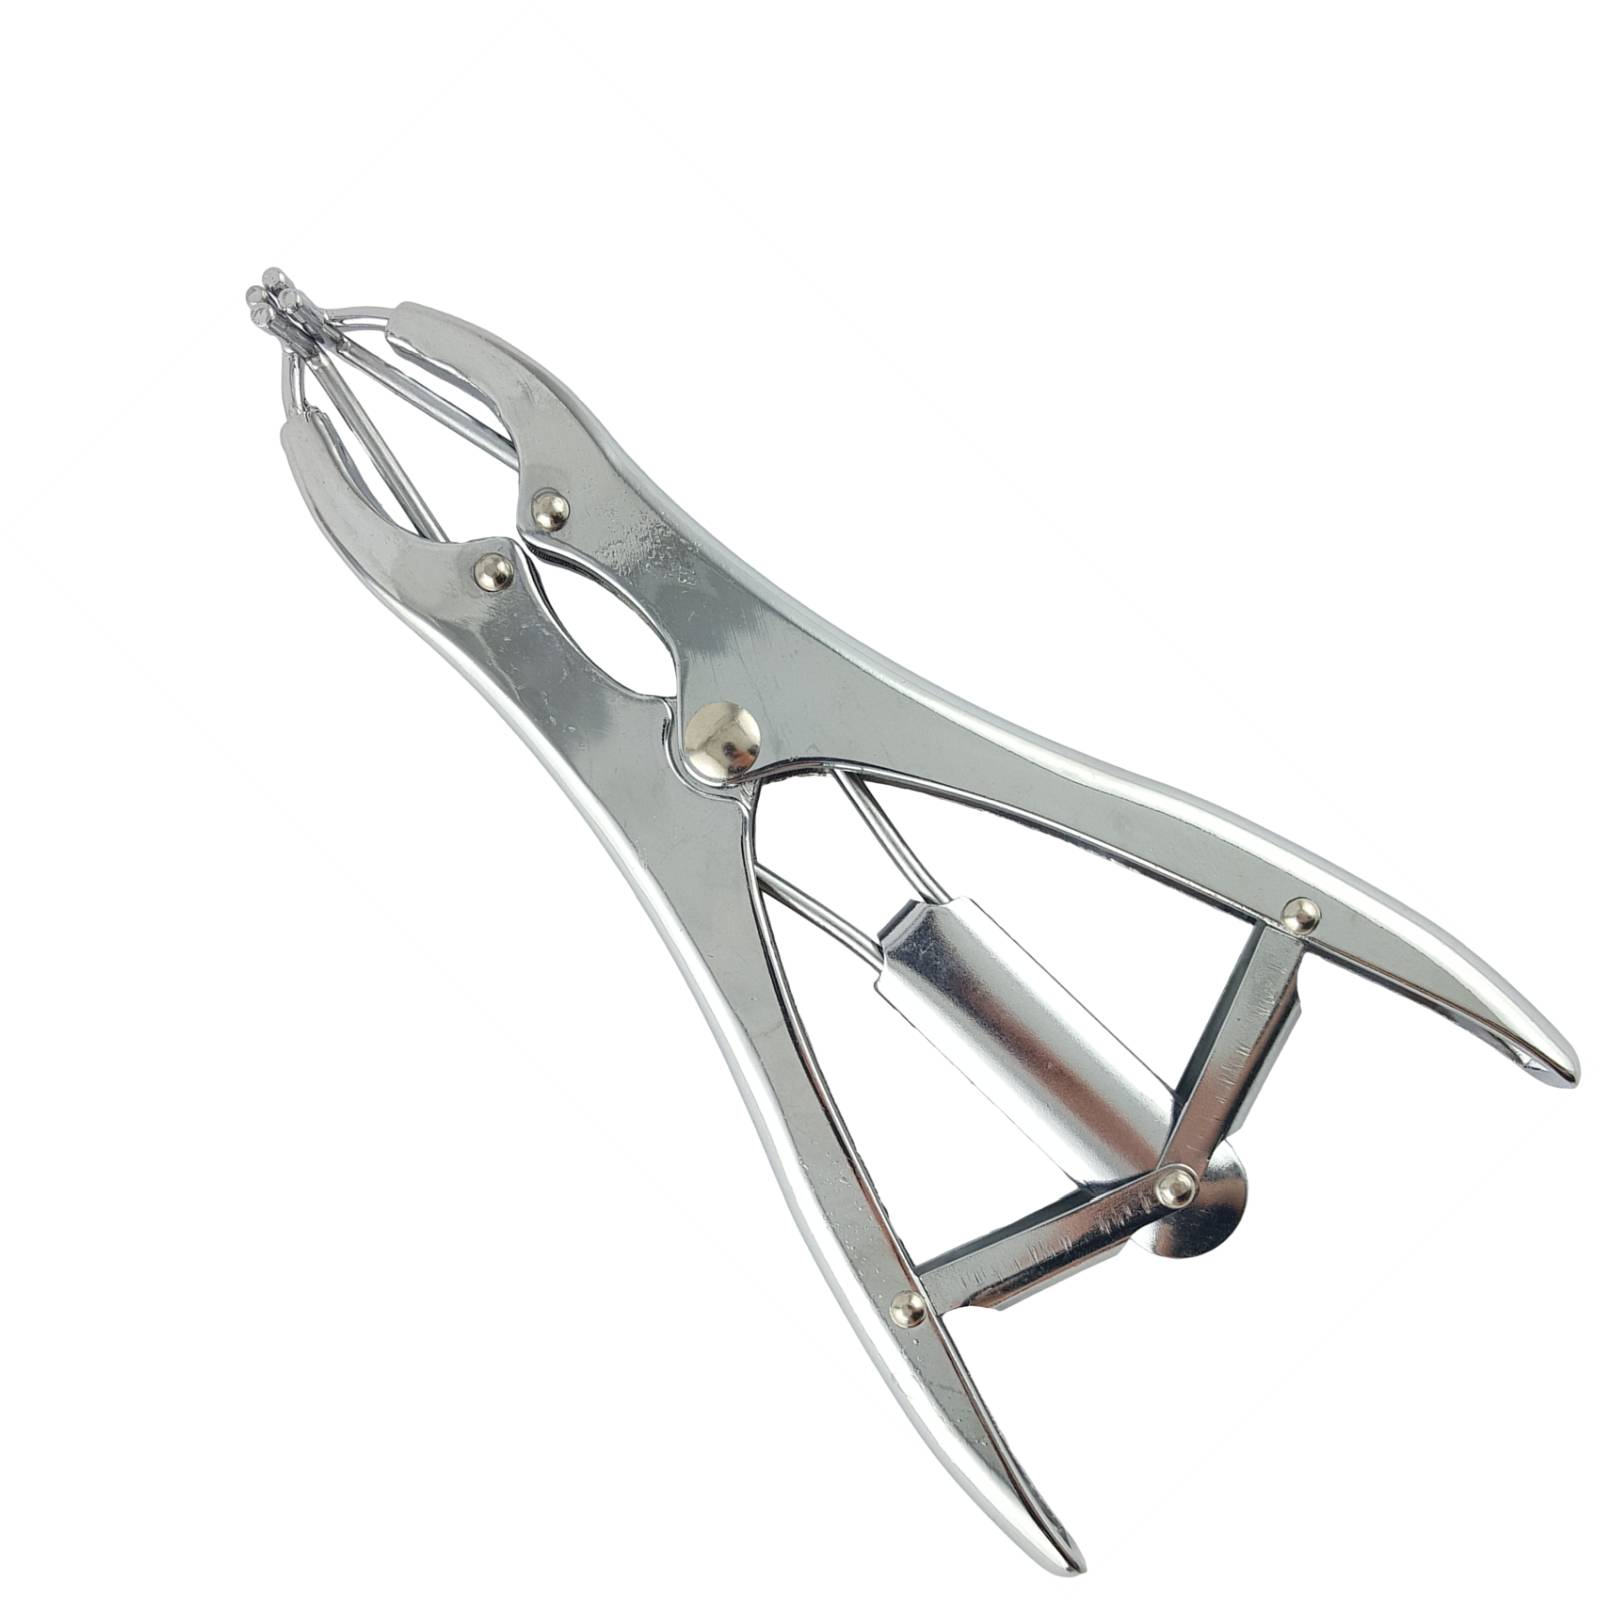 AgBoss Metal Castration Pliers